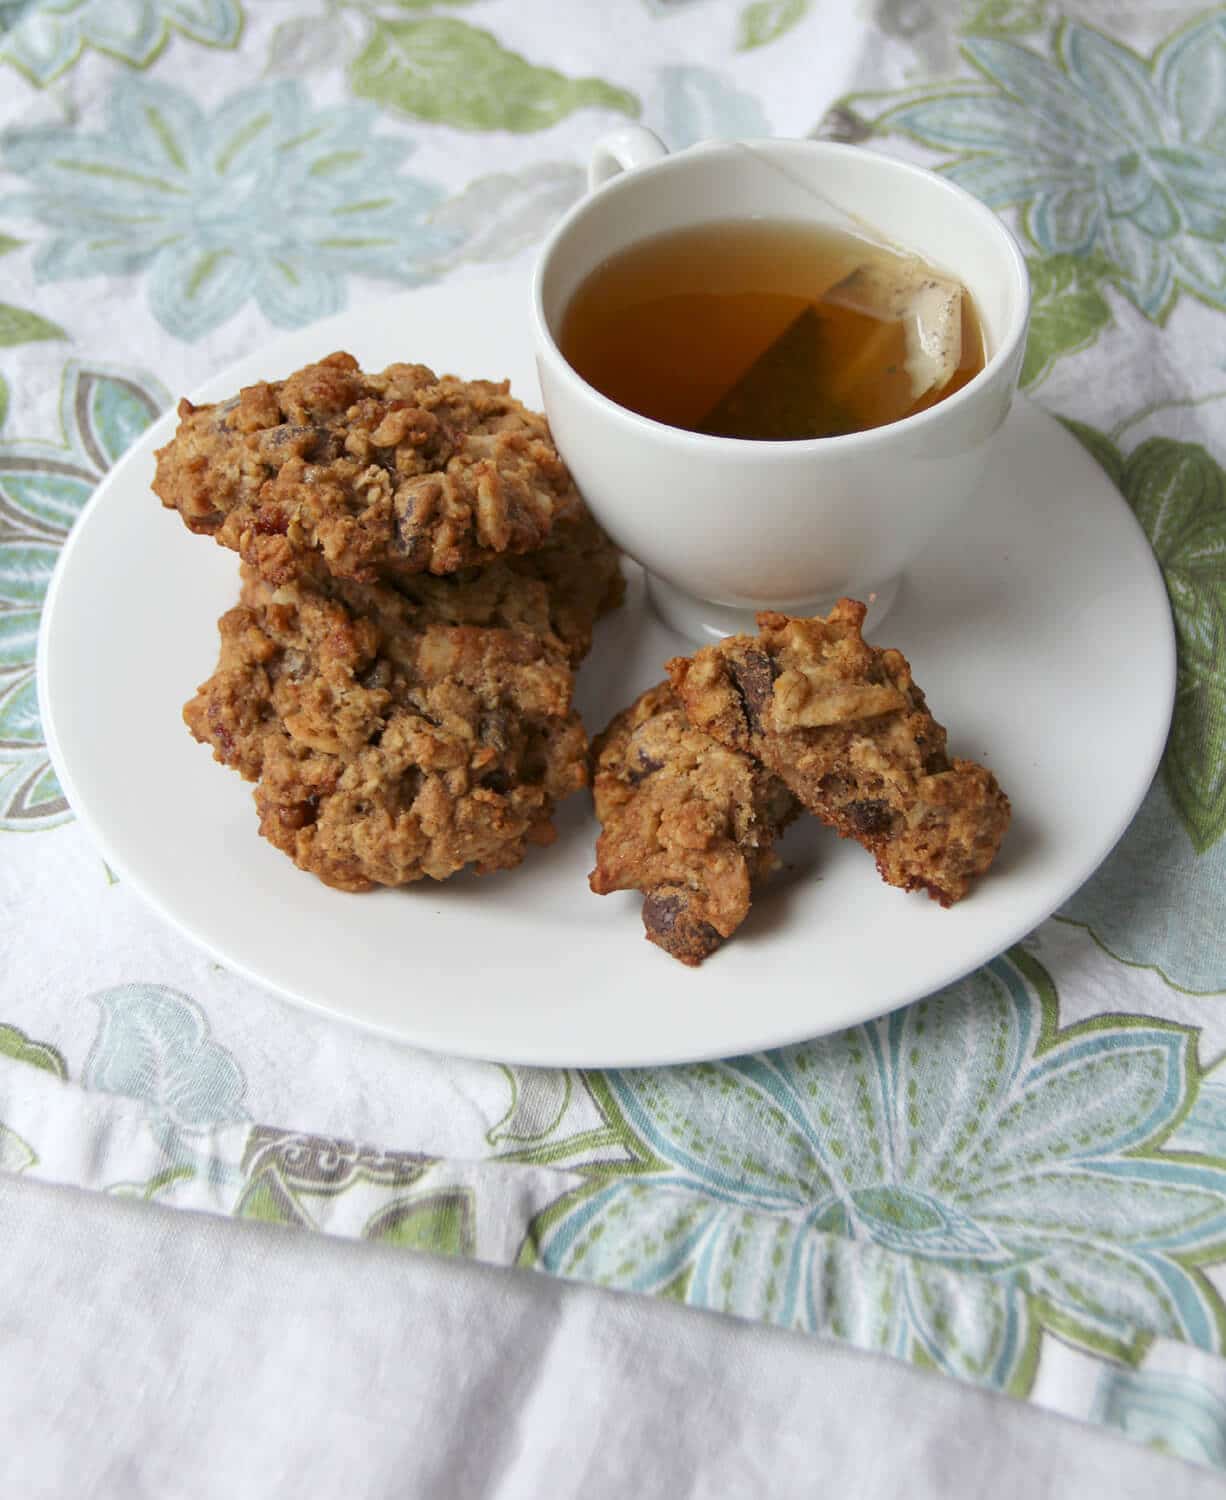 Hearty, healthy breakfast cookies made with whole wheat flour and filled with dates, walnuts, oats, and chocolate.